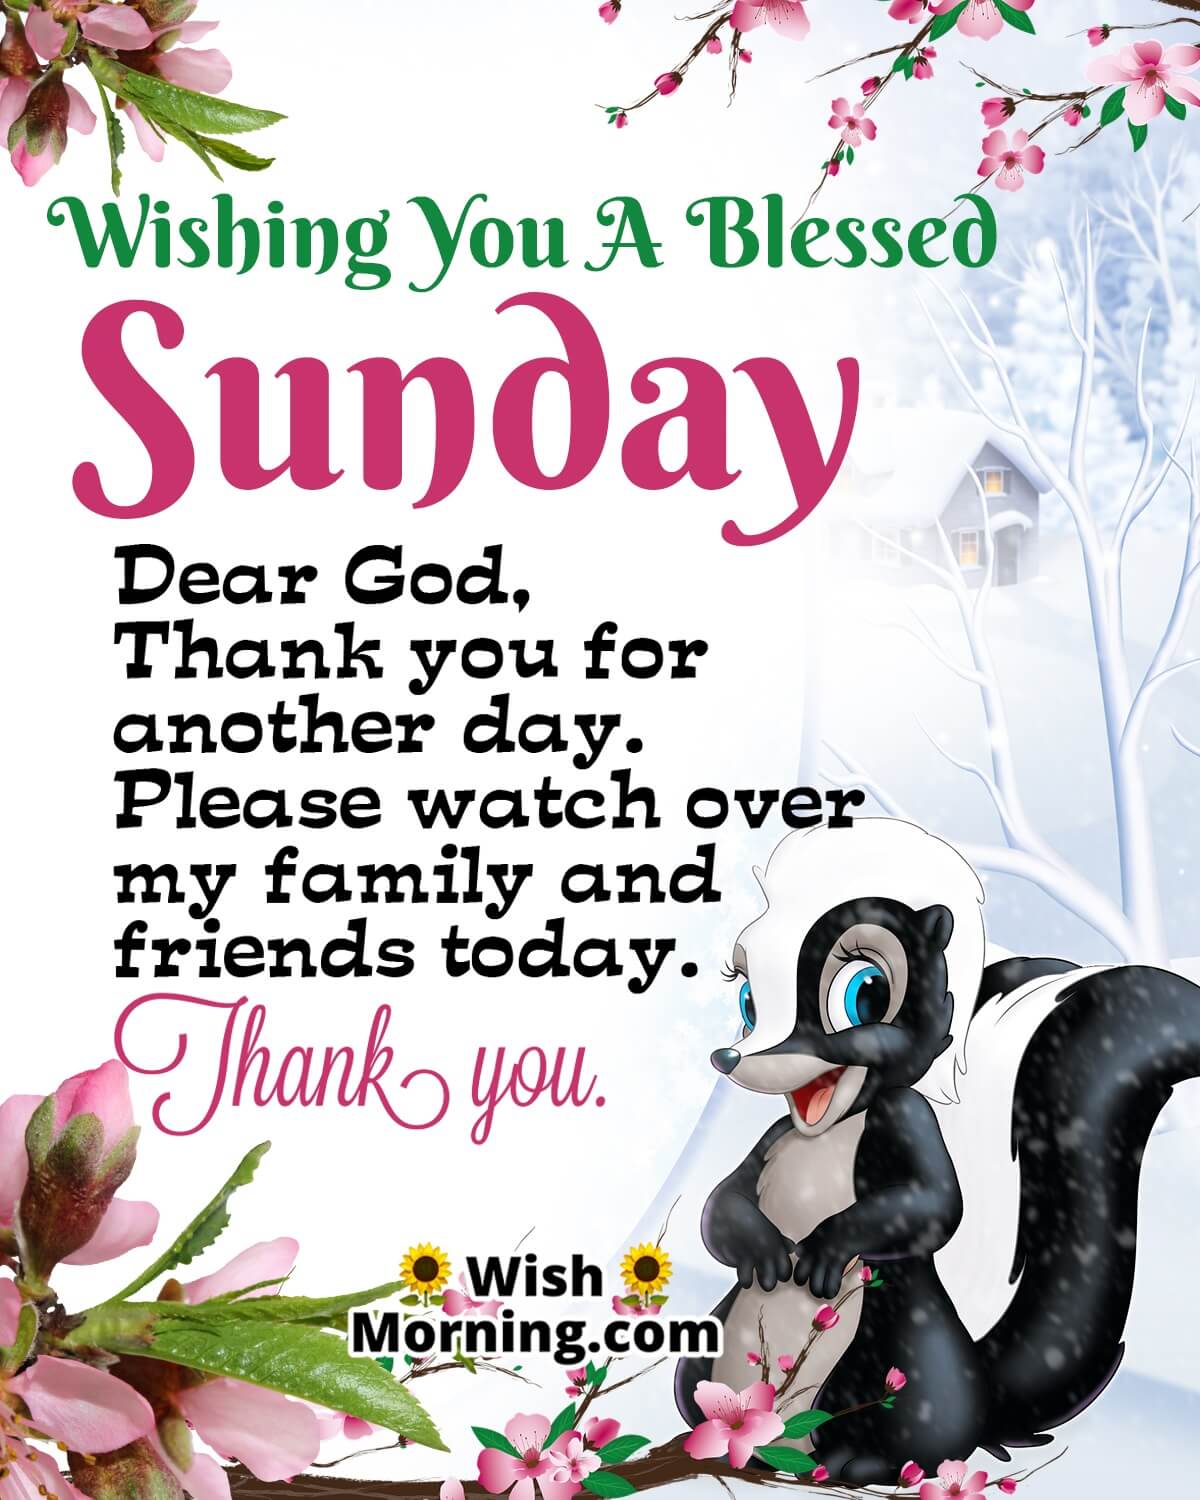 Wishing You A Blessed Sunday